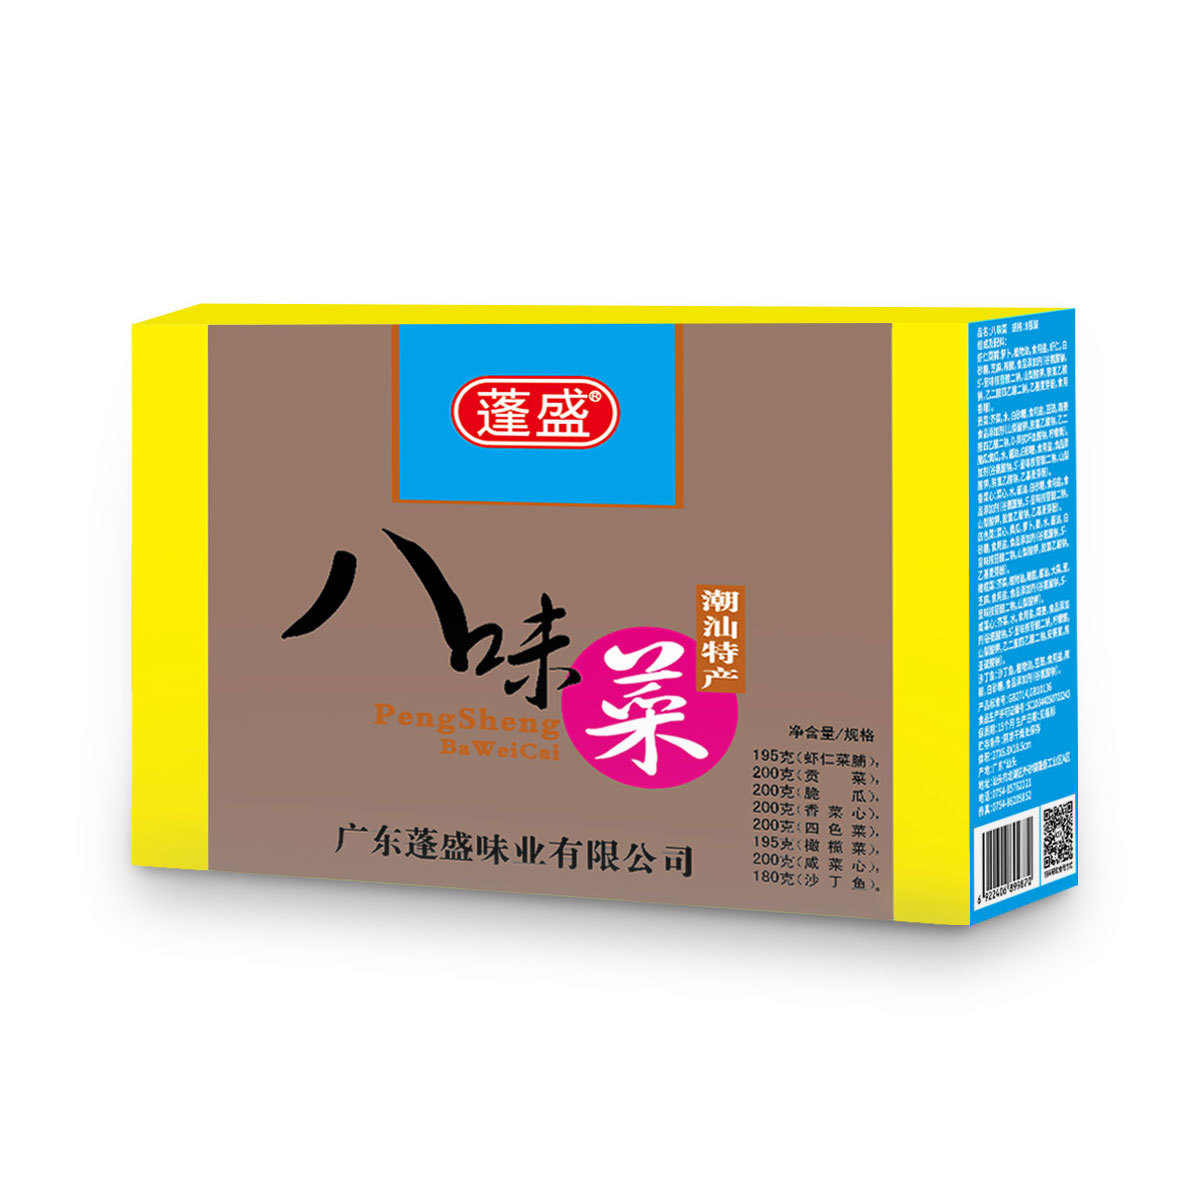 PengSheng Eight Flavored Vegetables Gift Box